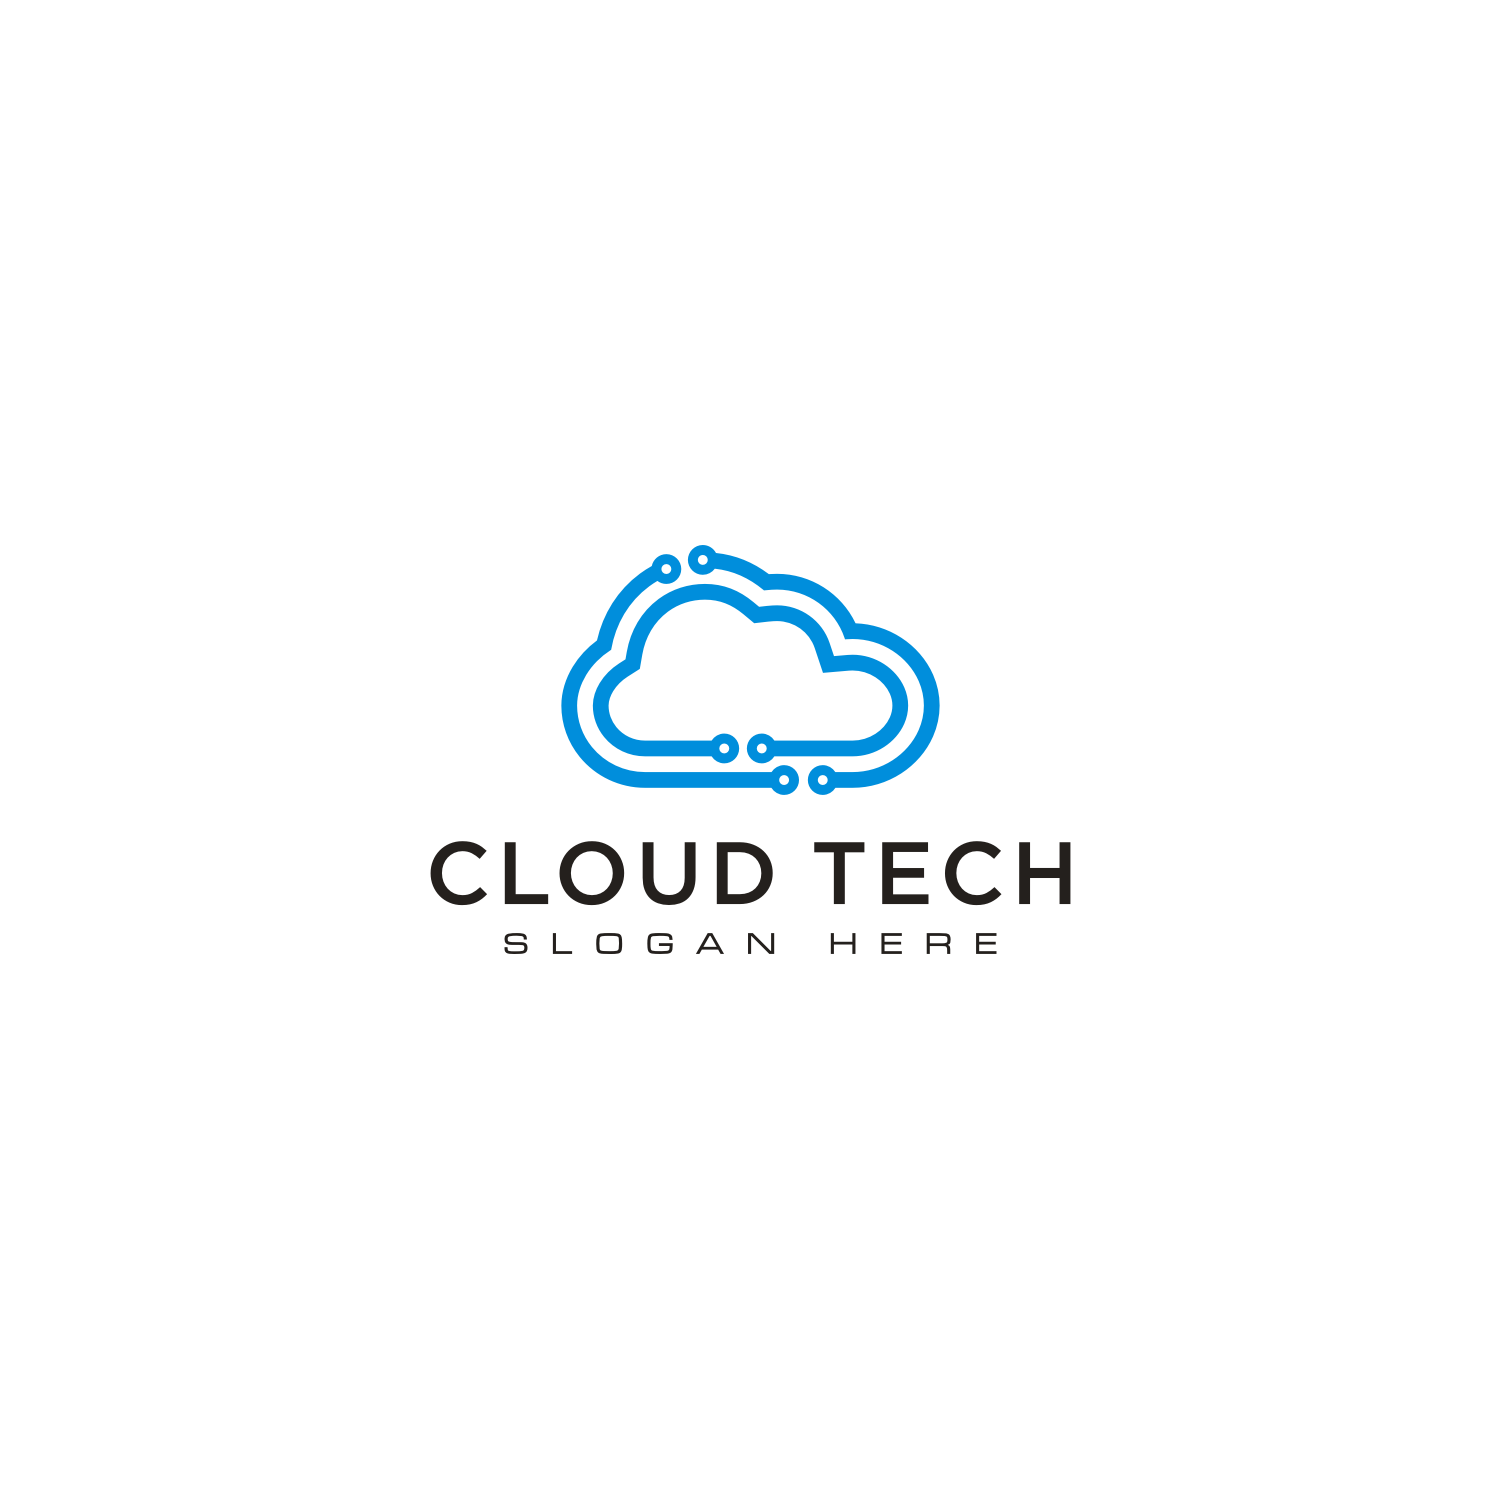 Cloud Technology Vector Template Design Cover Image.